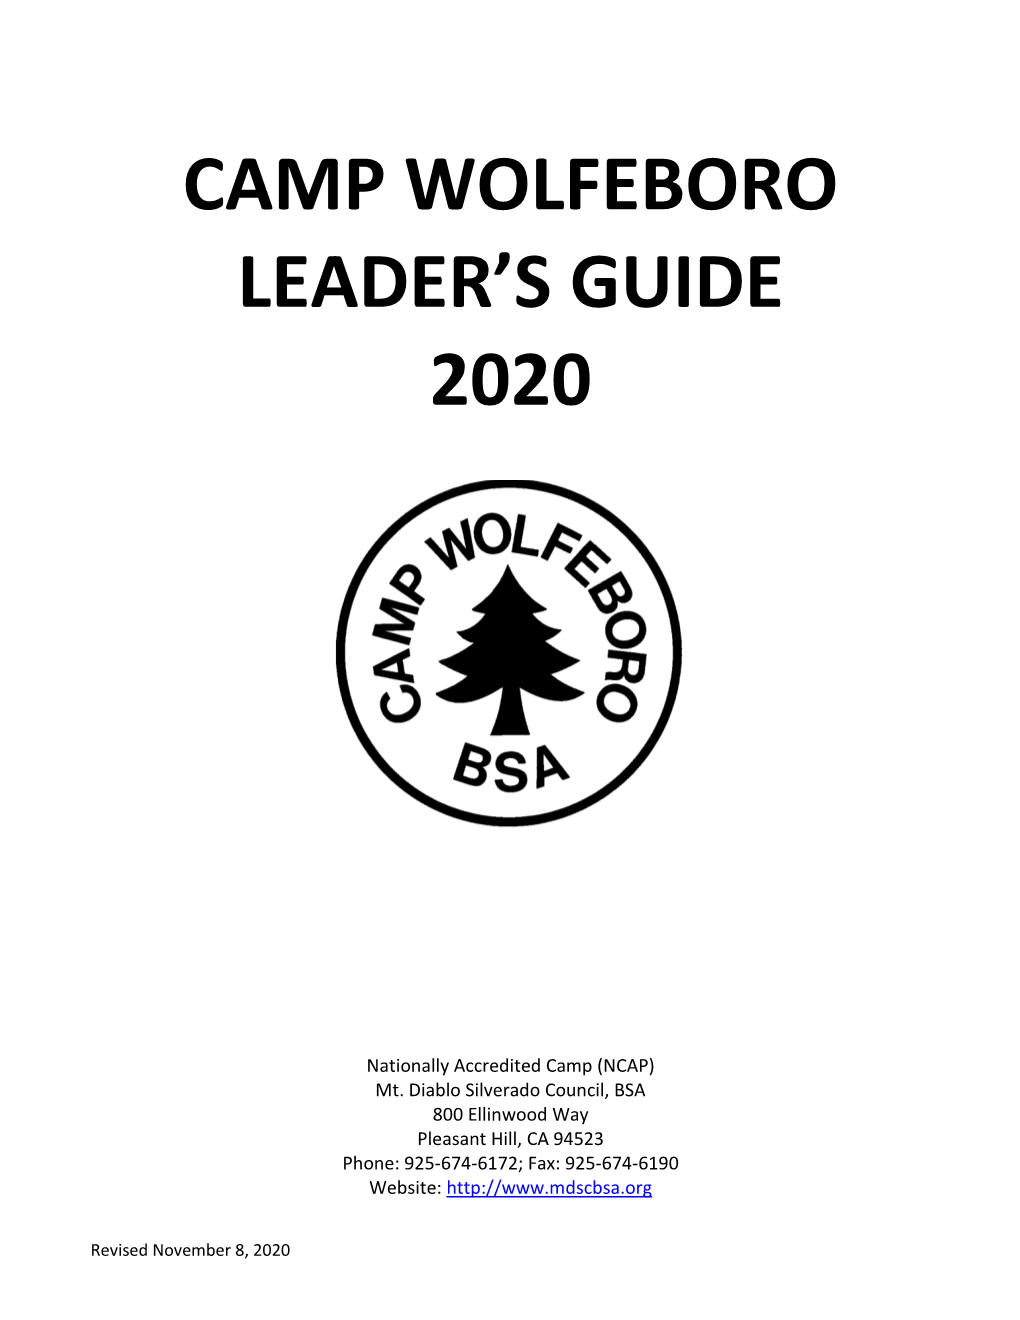 Camp Wolfeboro Leader's Guide 2020